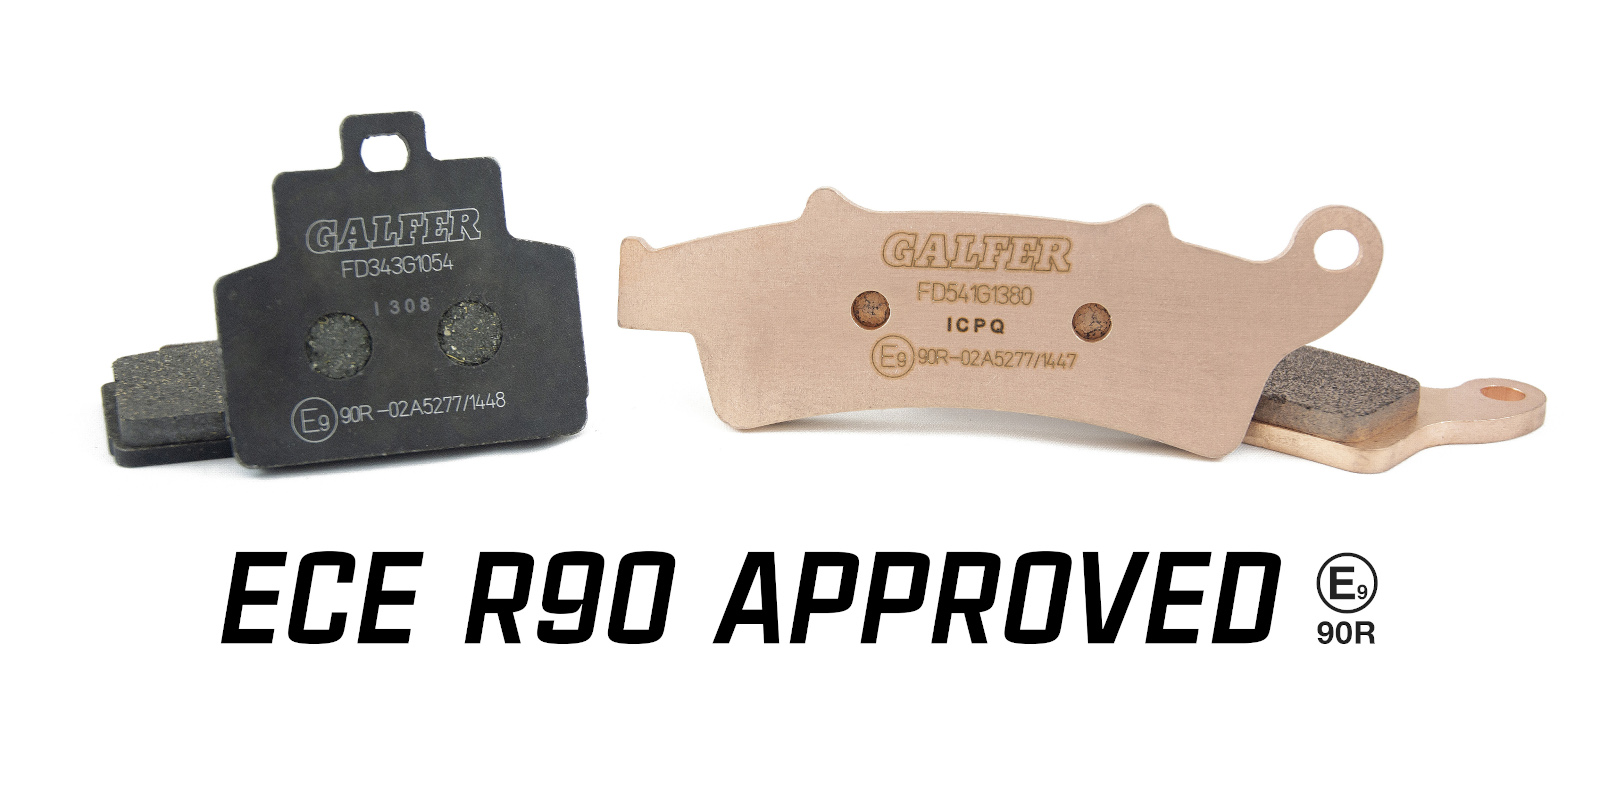 Galfer obtains ECE R90 certification for its brake pads